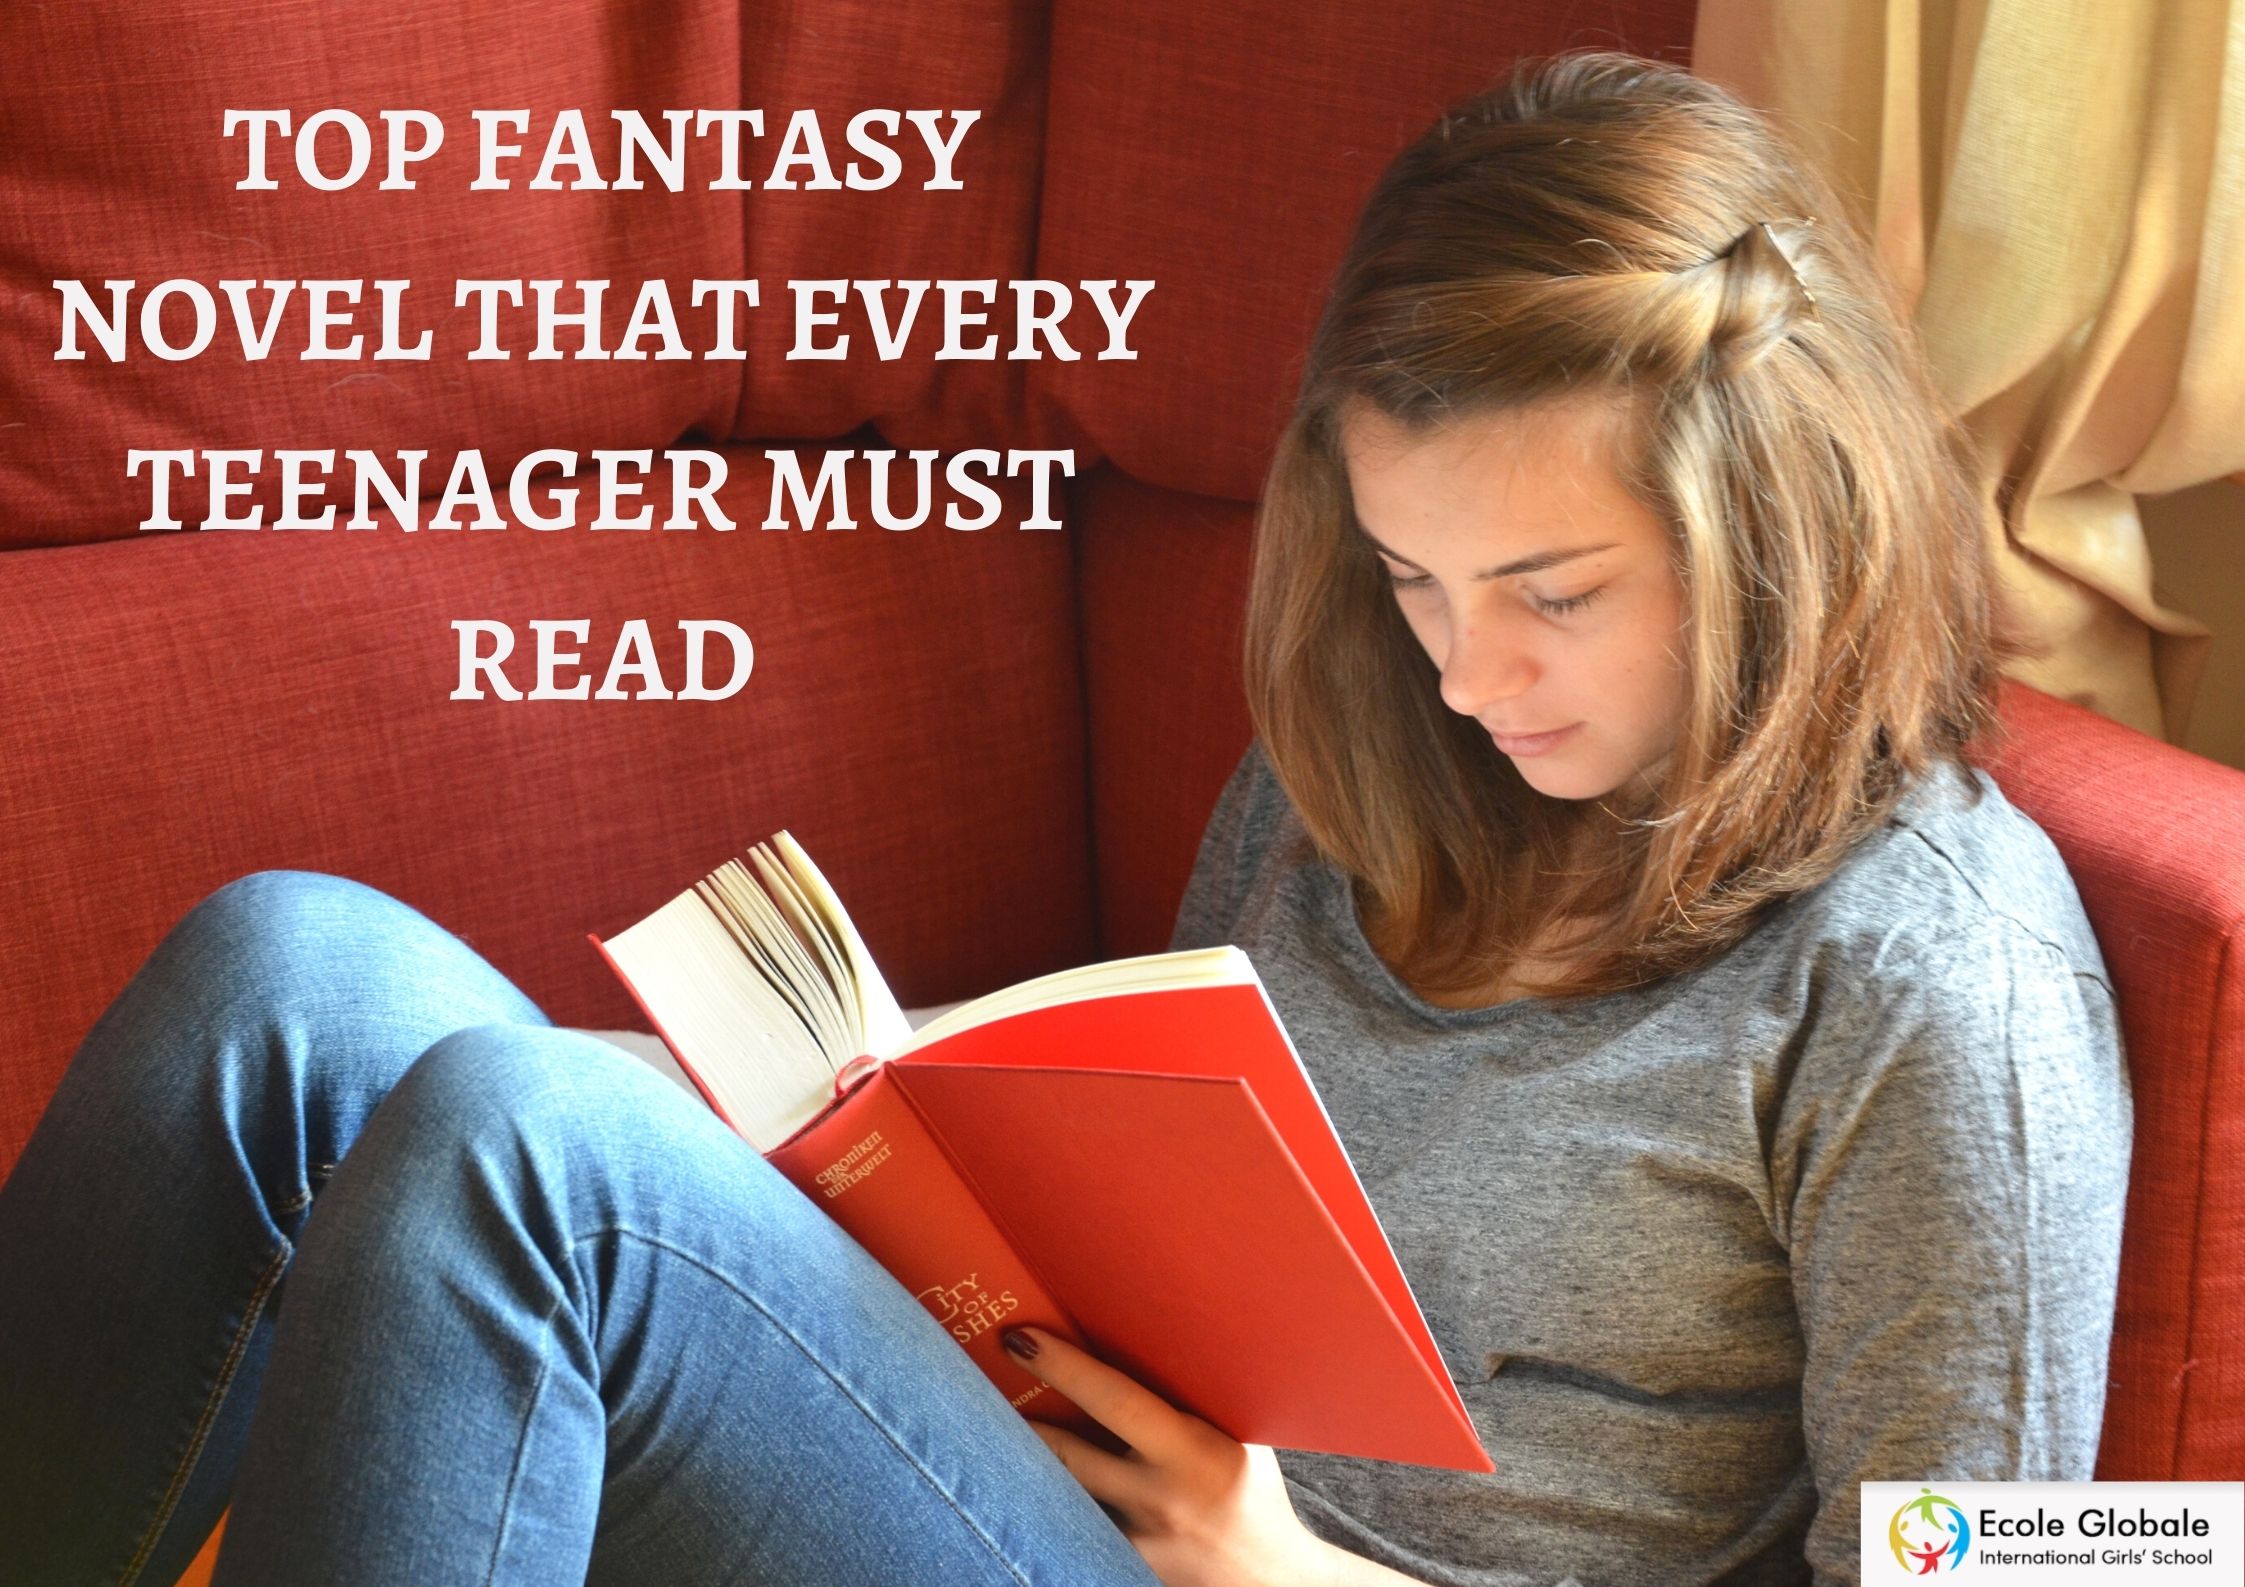 TOP FANTASY NOVEL THAT EVERY TEENAGER MUST READ